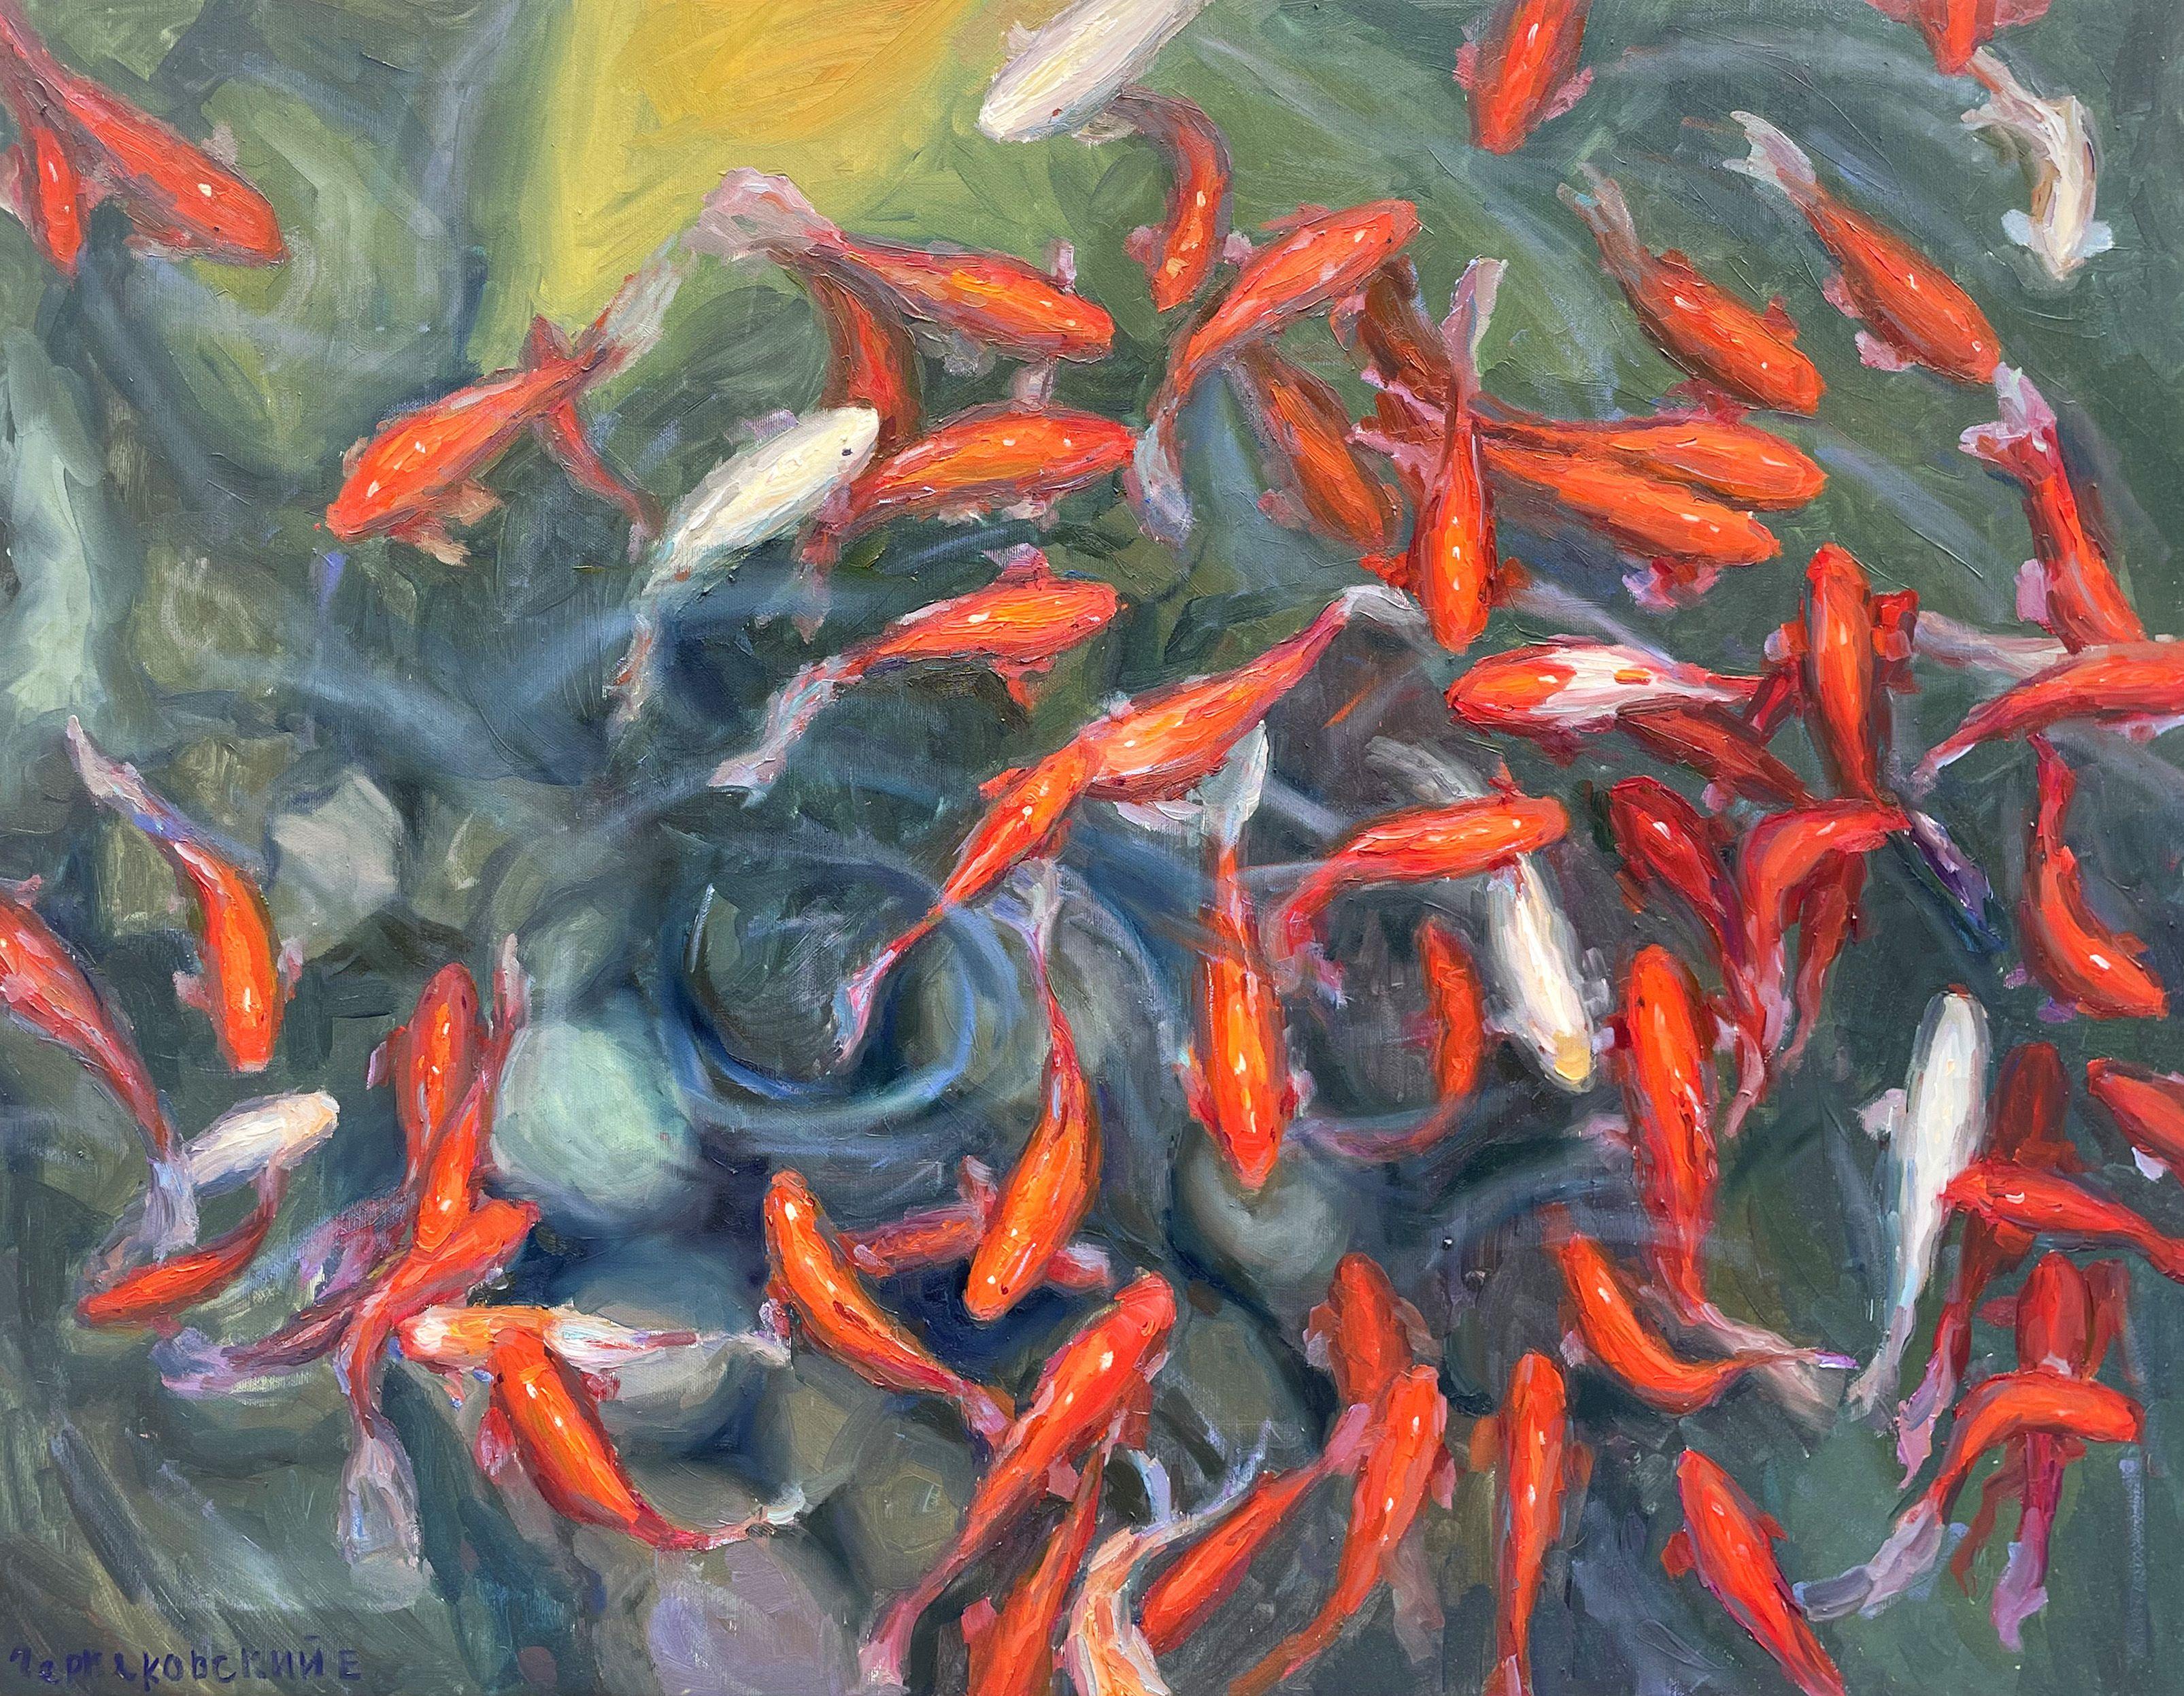 Original Oil painting by Ukrainian artist Evgeny Chernyakovsky    "Koi"  70.0 X 90.0 CM / 27.5 X 35.4 IN  HIGH QUALITY oil on canvas  Signed on the front and back  Dated 2023  Good condition  GUARANTEE OF AUTHENTICITY   :: Painting :: Impressionist